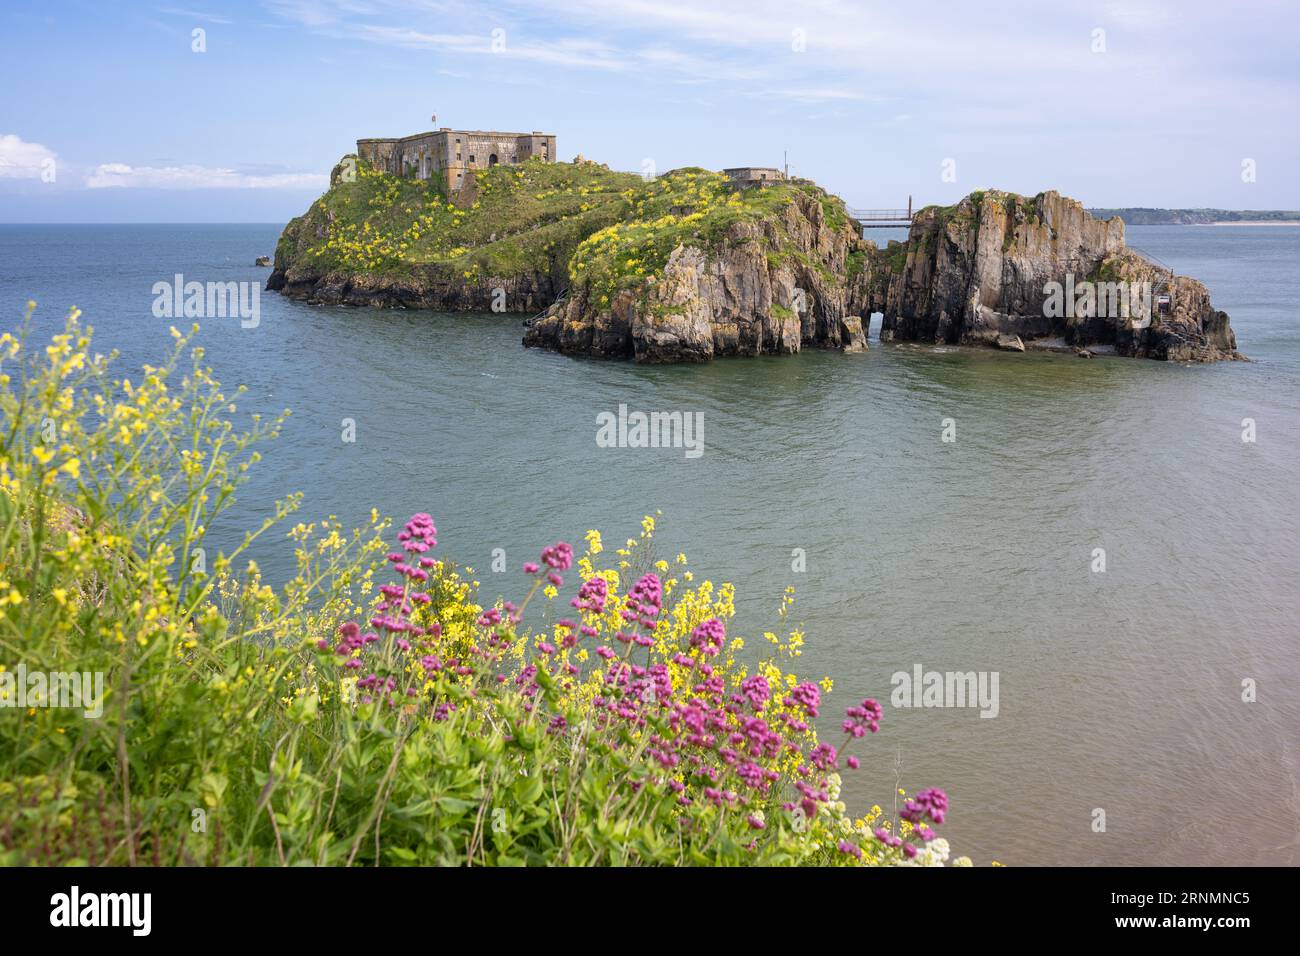 St Catherines Island and St Catherines Fort, Tenby, Pembrokeshire, Wales Stock Photo